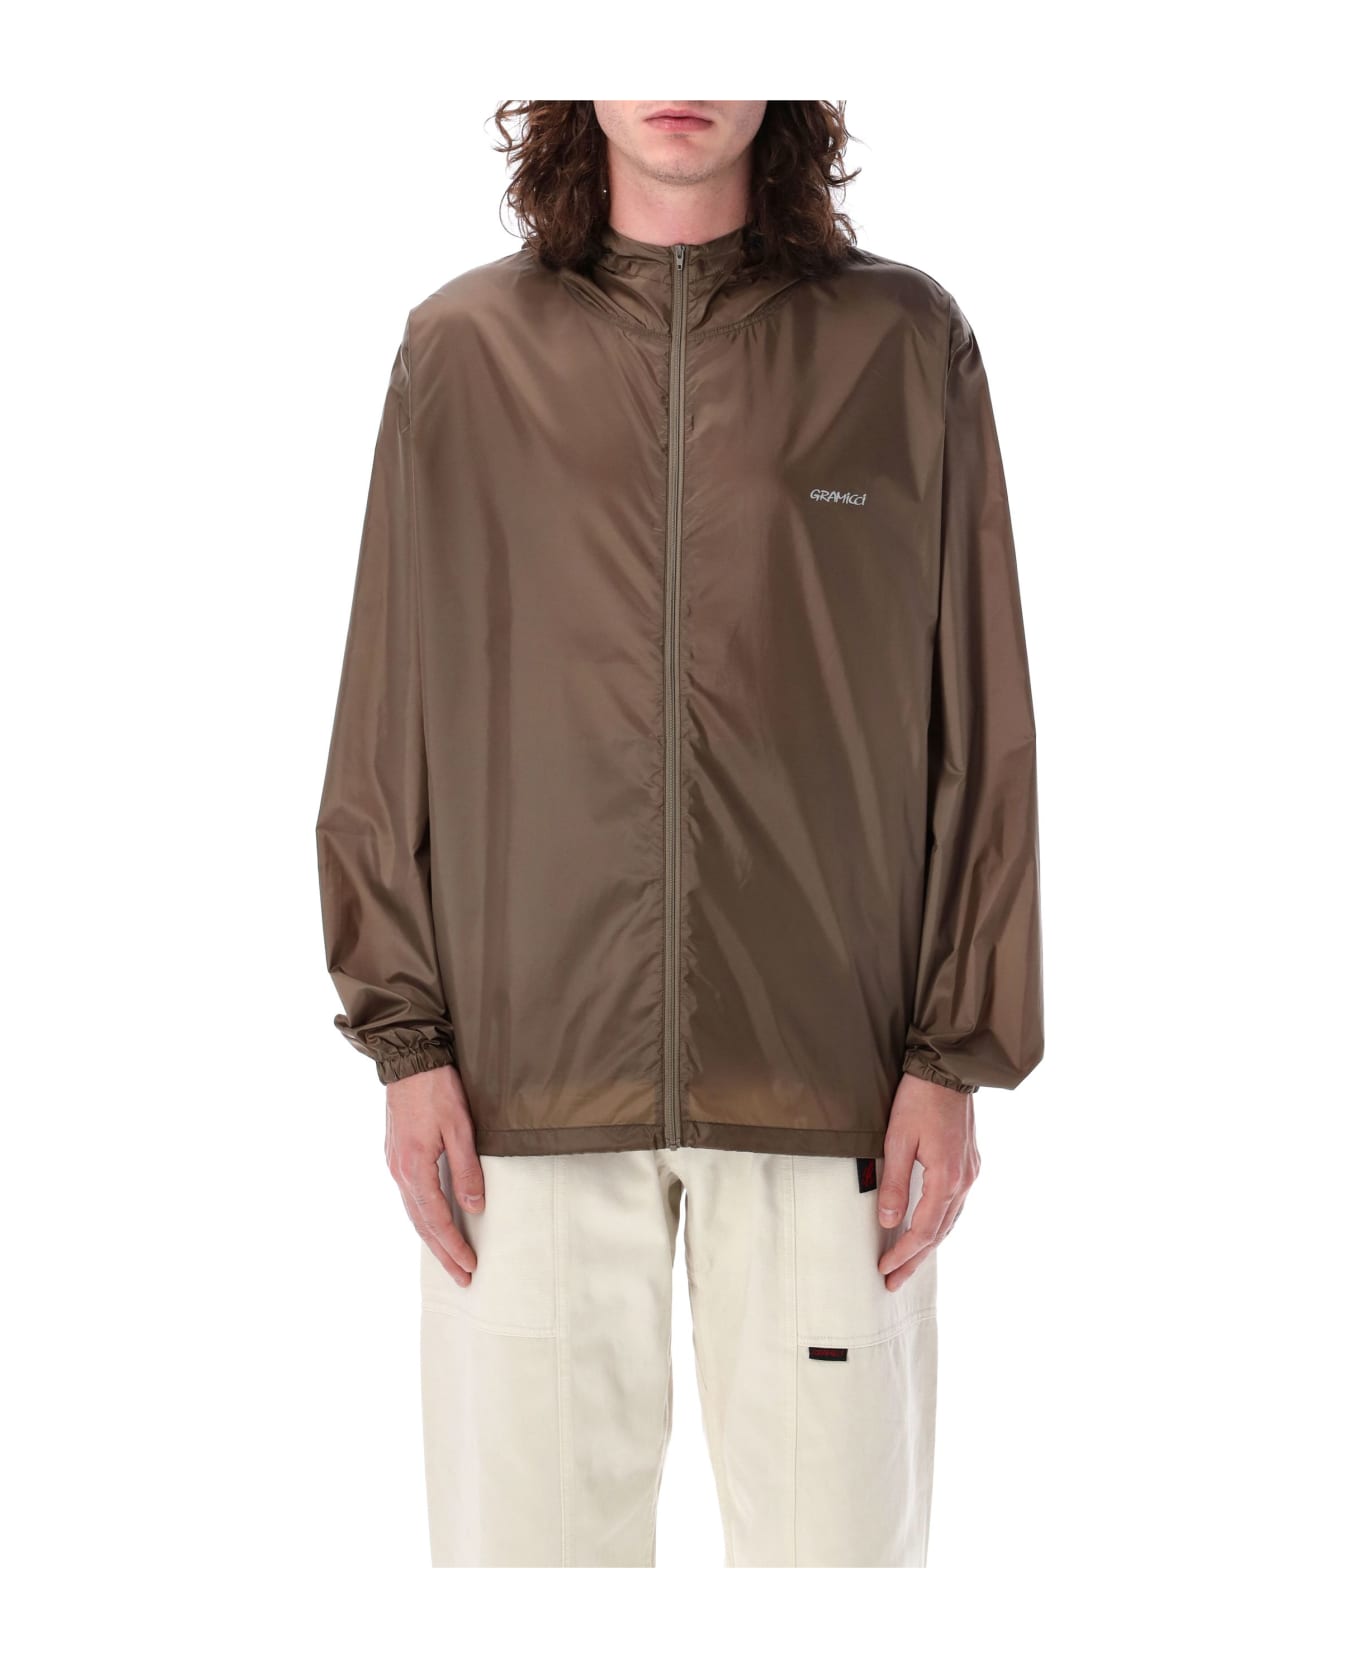 Gramicci Packable Windbreaker Jacket - TAUPE ブレザー